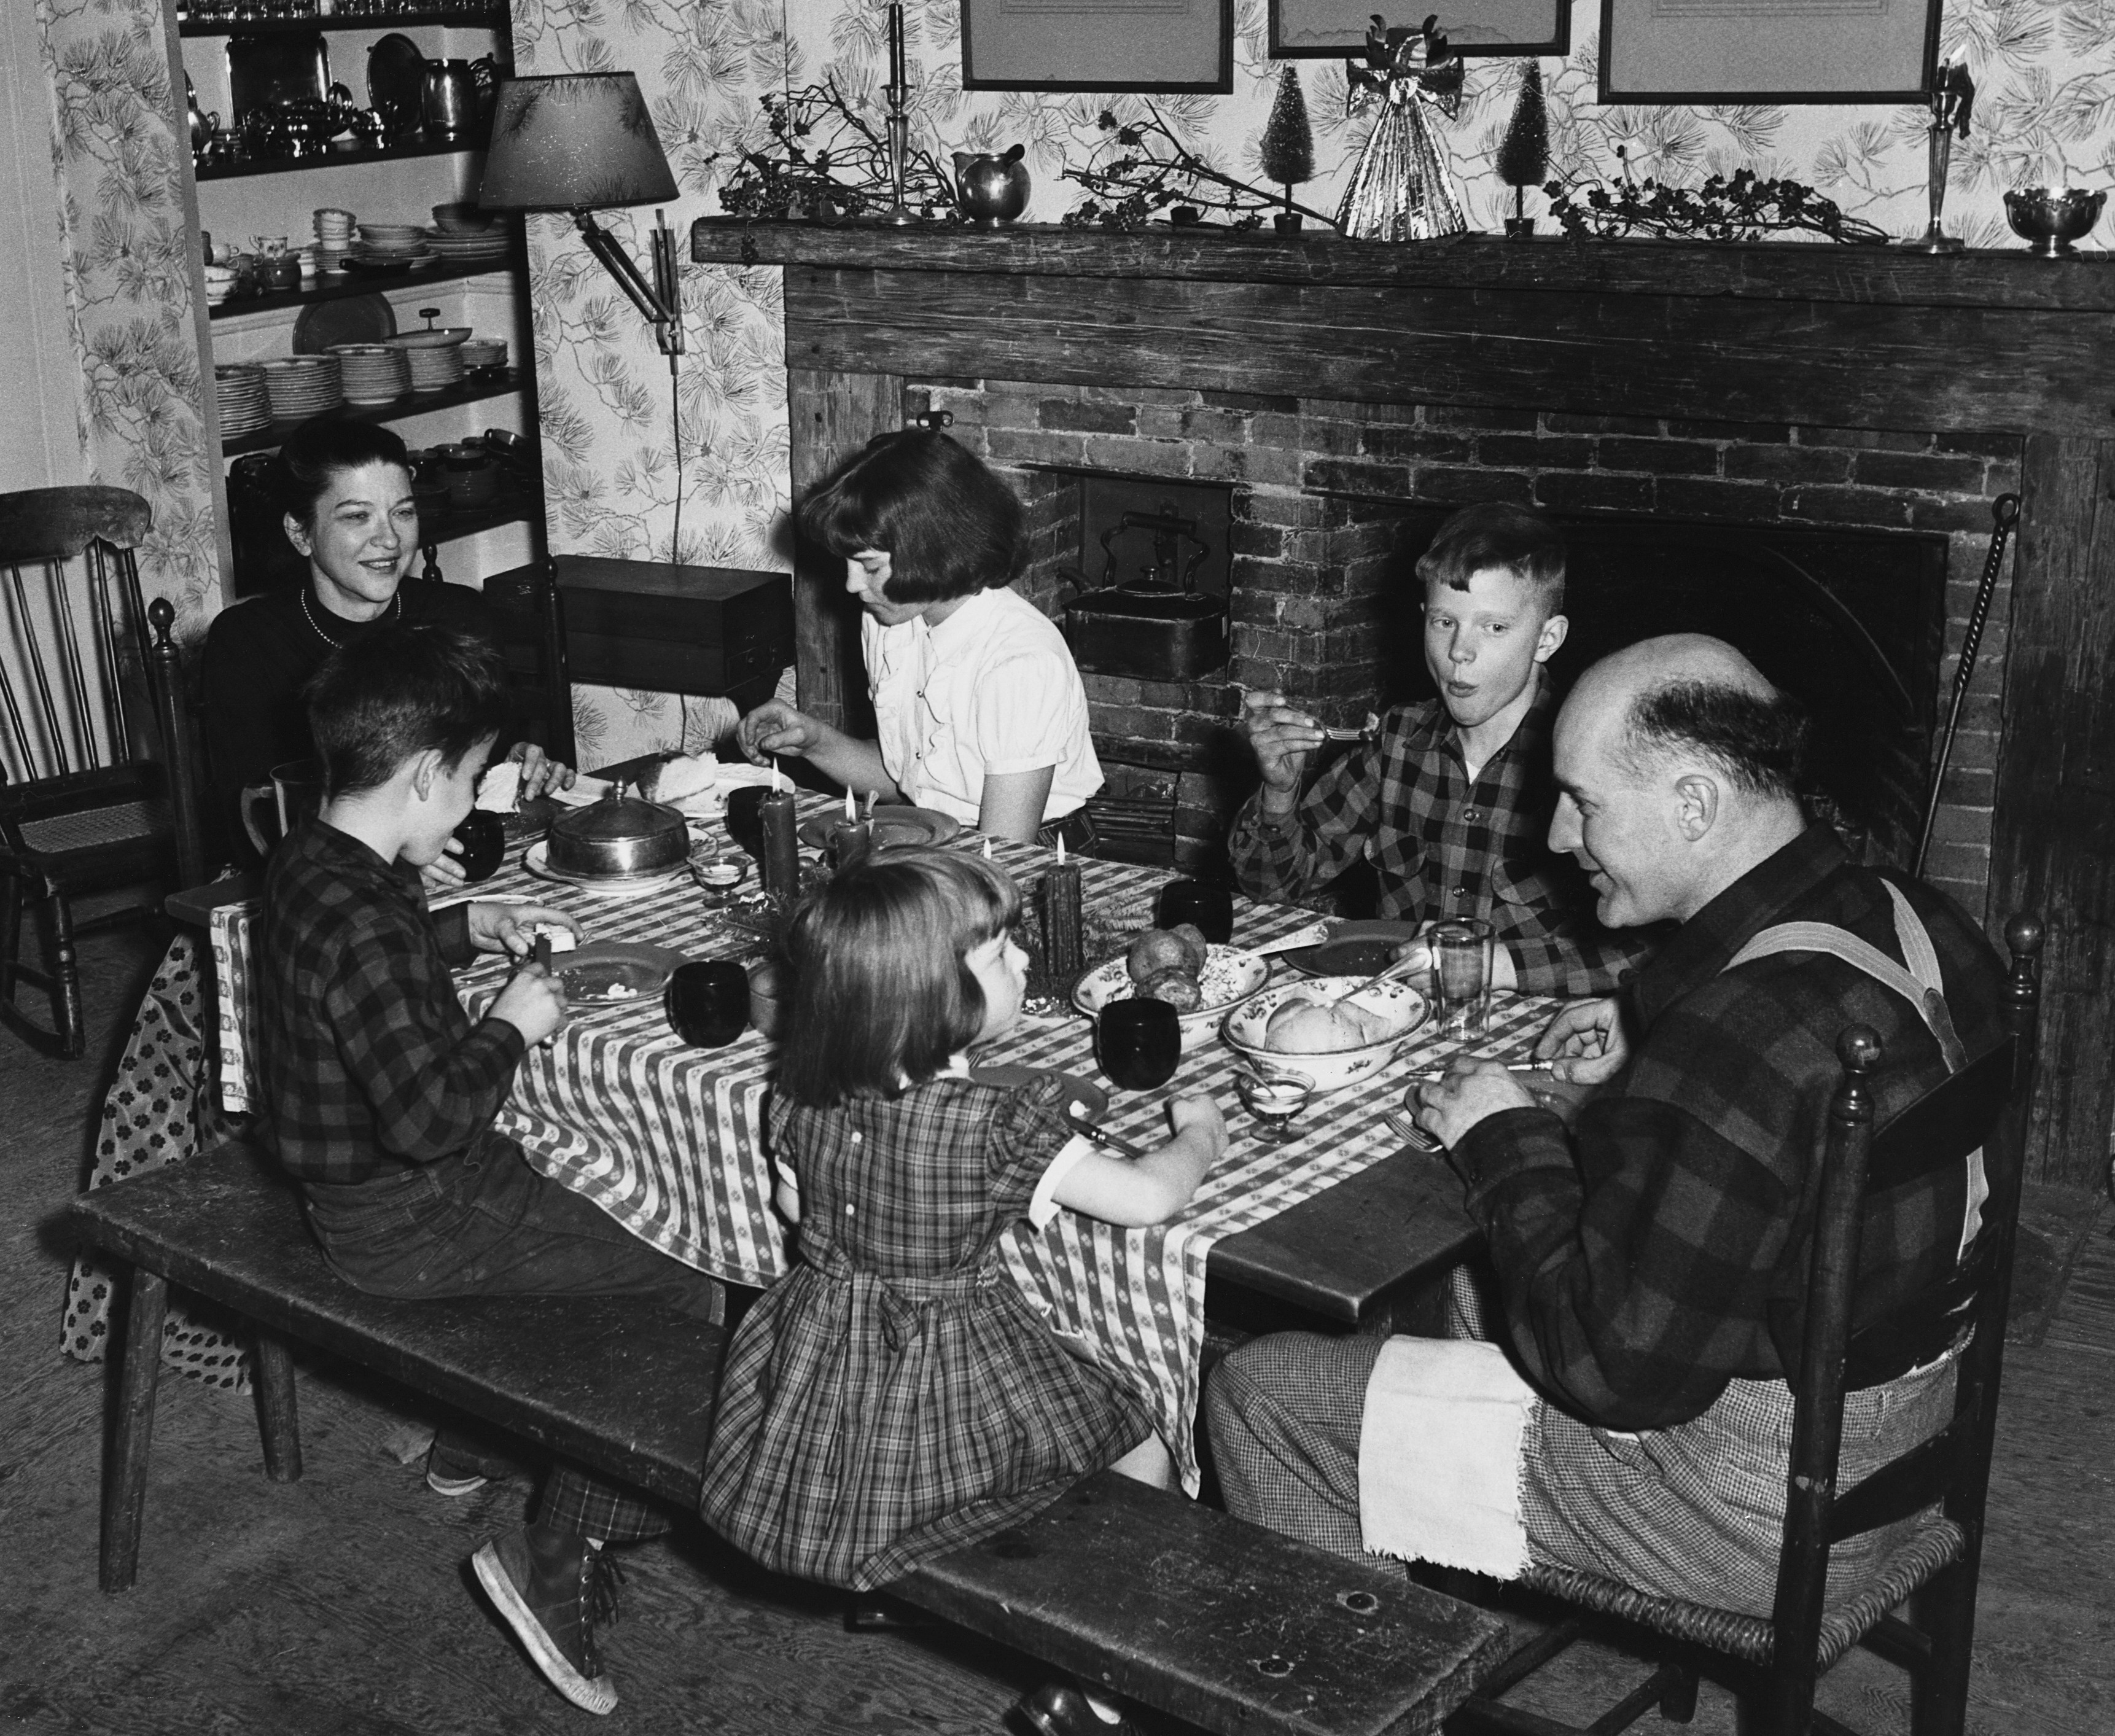 ca. 1950, USA --- Family Enjoy Festive Meal --- Image by © Hulton-Deutsch Collection/CORBIS [07DECEMBER2015 HEALTH BITES LIFE]